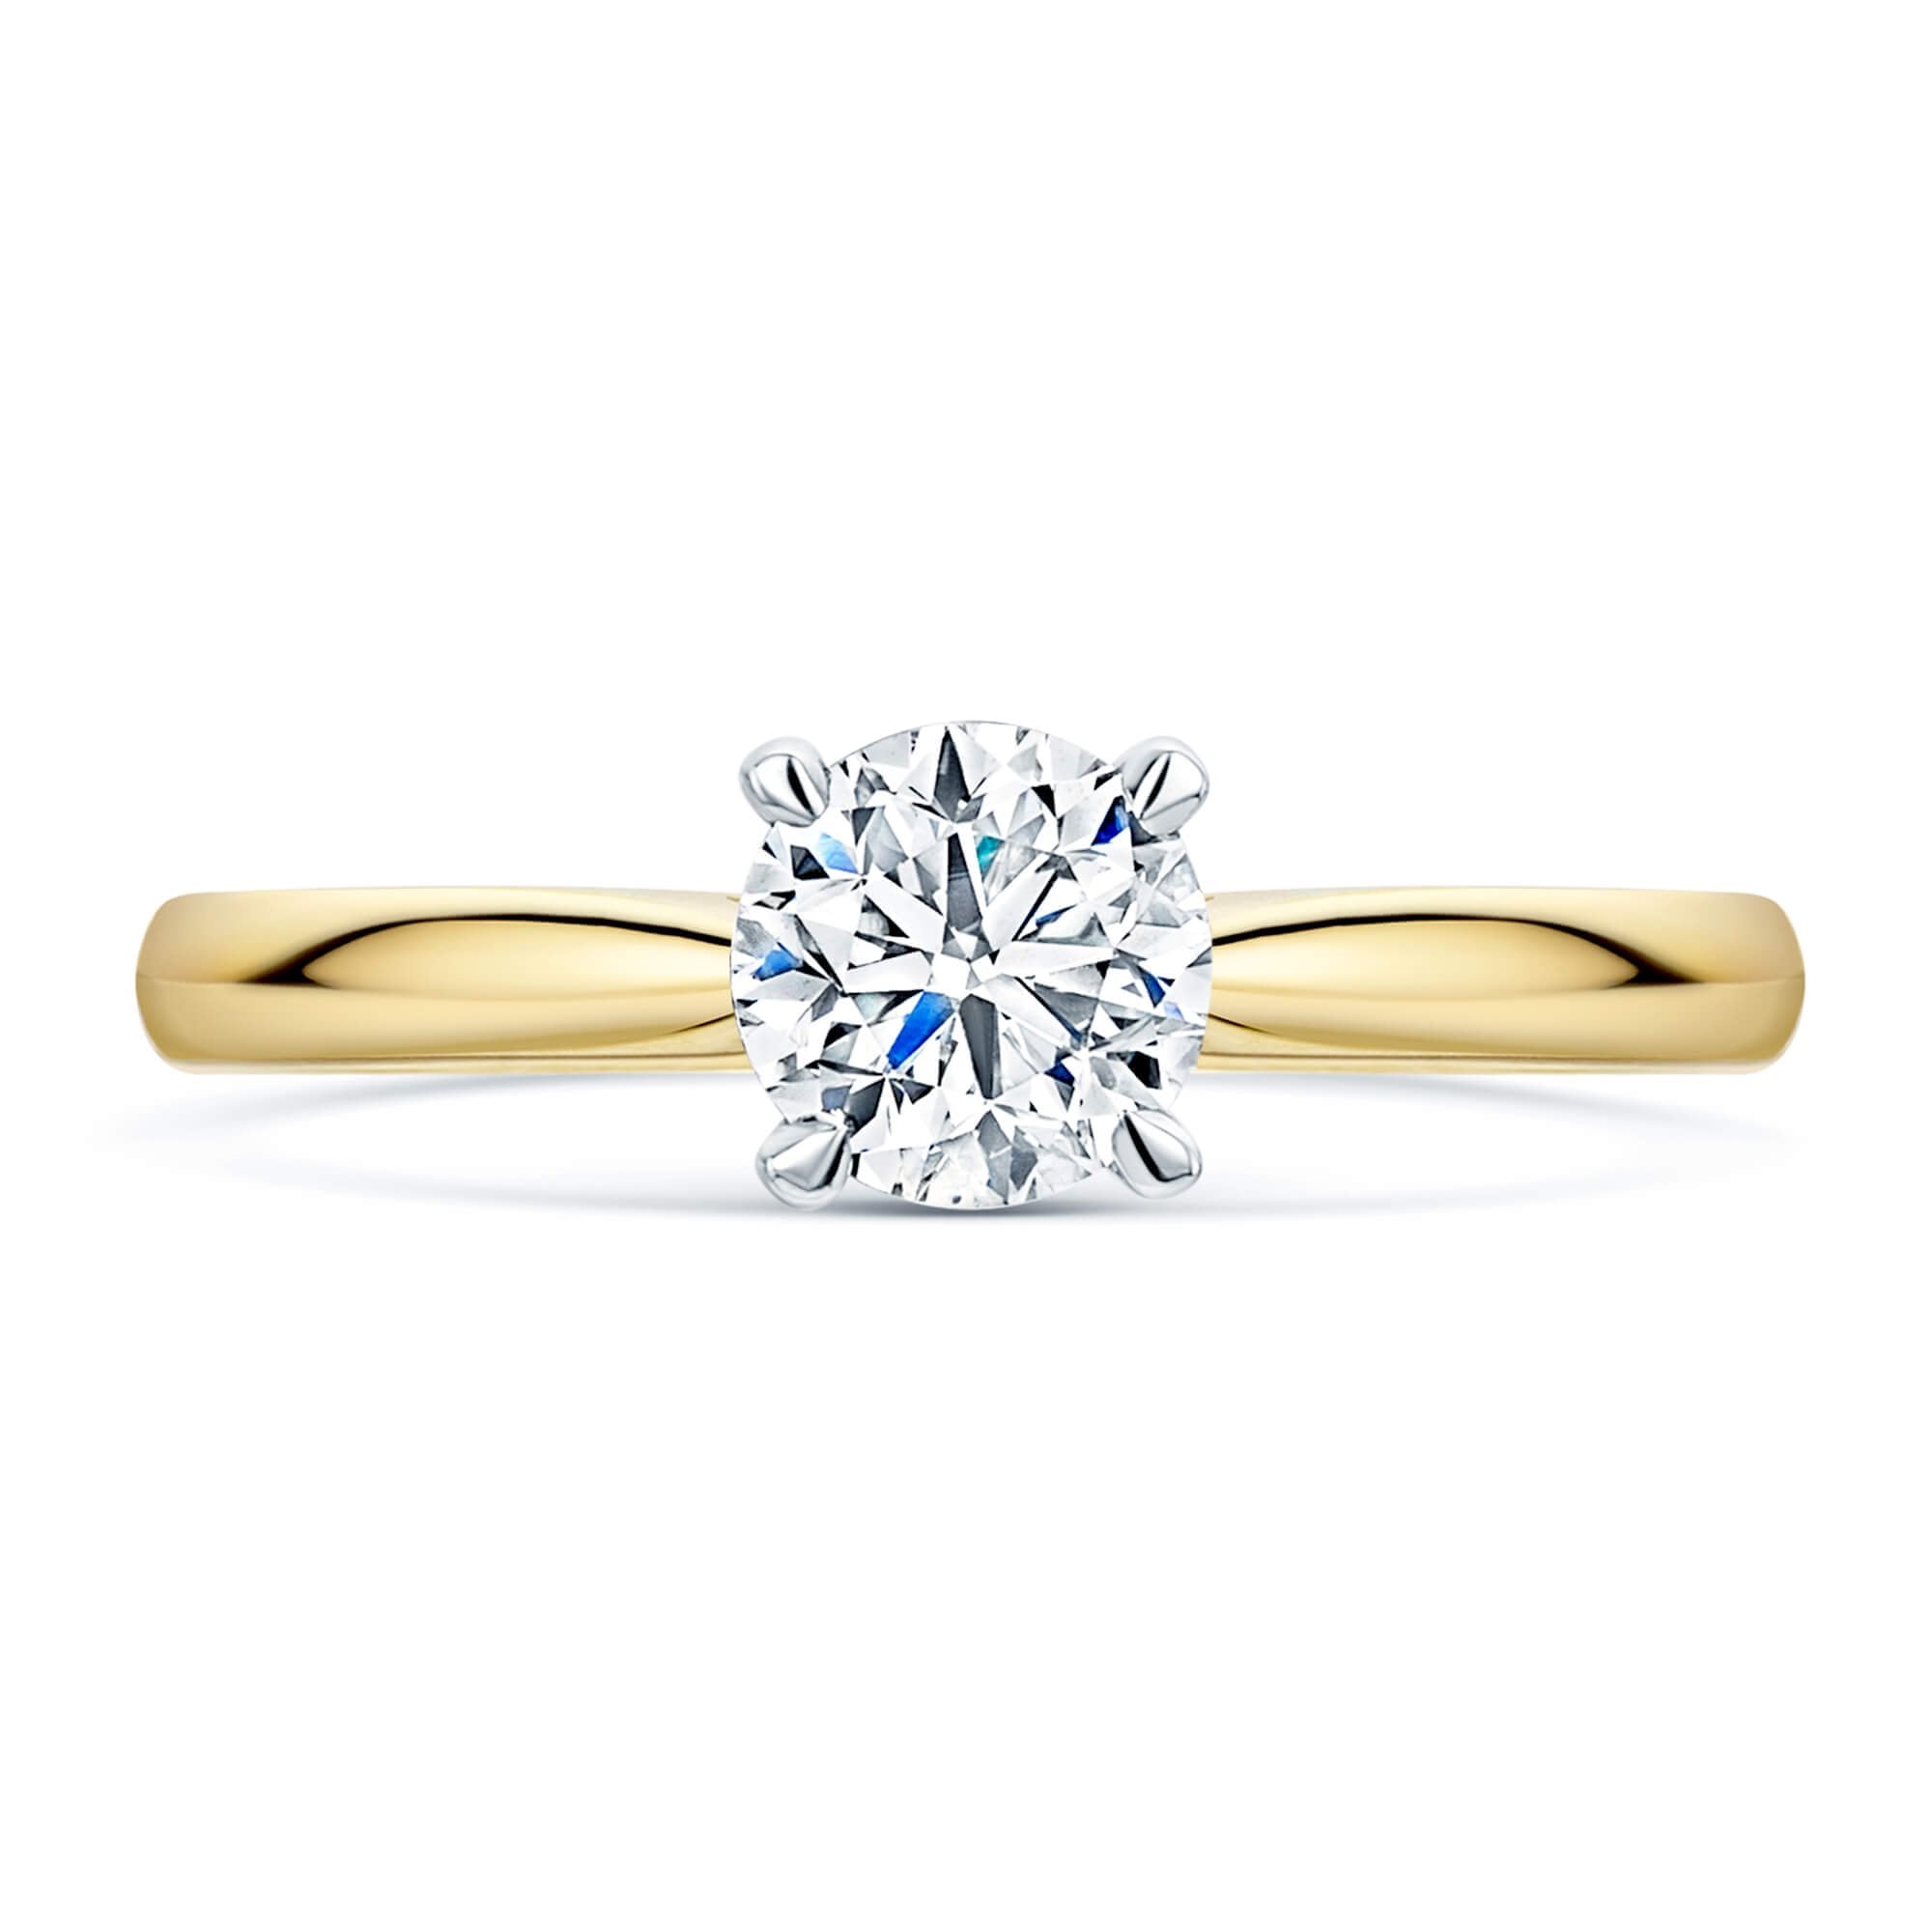 Simply Solitaire Collection 18ct Yellow Gold Diamond Solitaire Engagement Ring GIA Certified 0.70 Carat